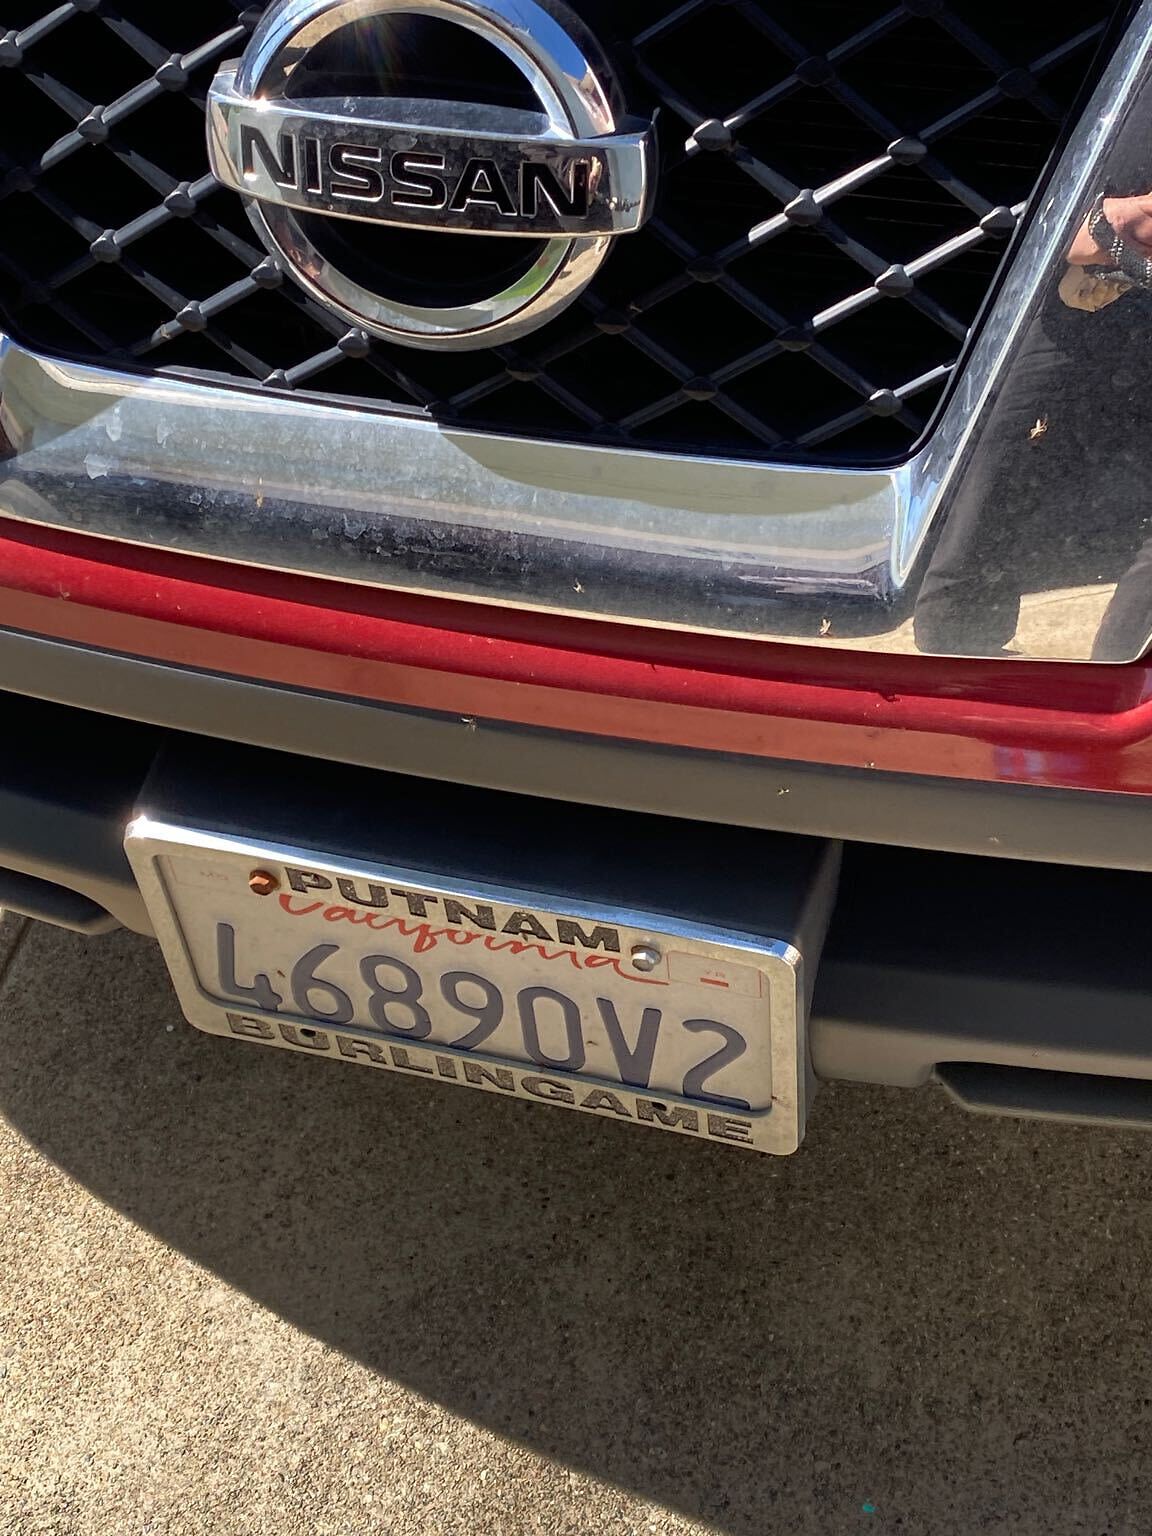 Photo of car in the street with license plate 46890V2 in California